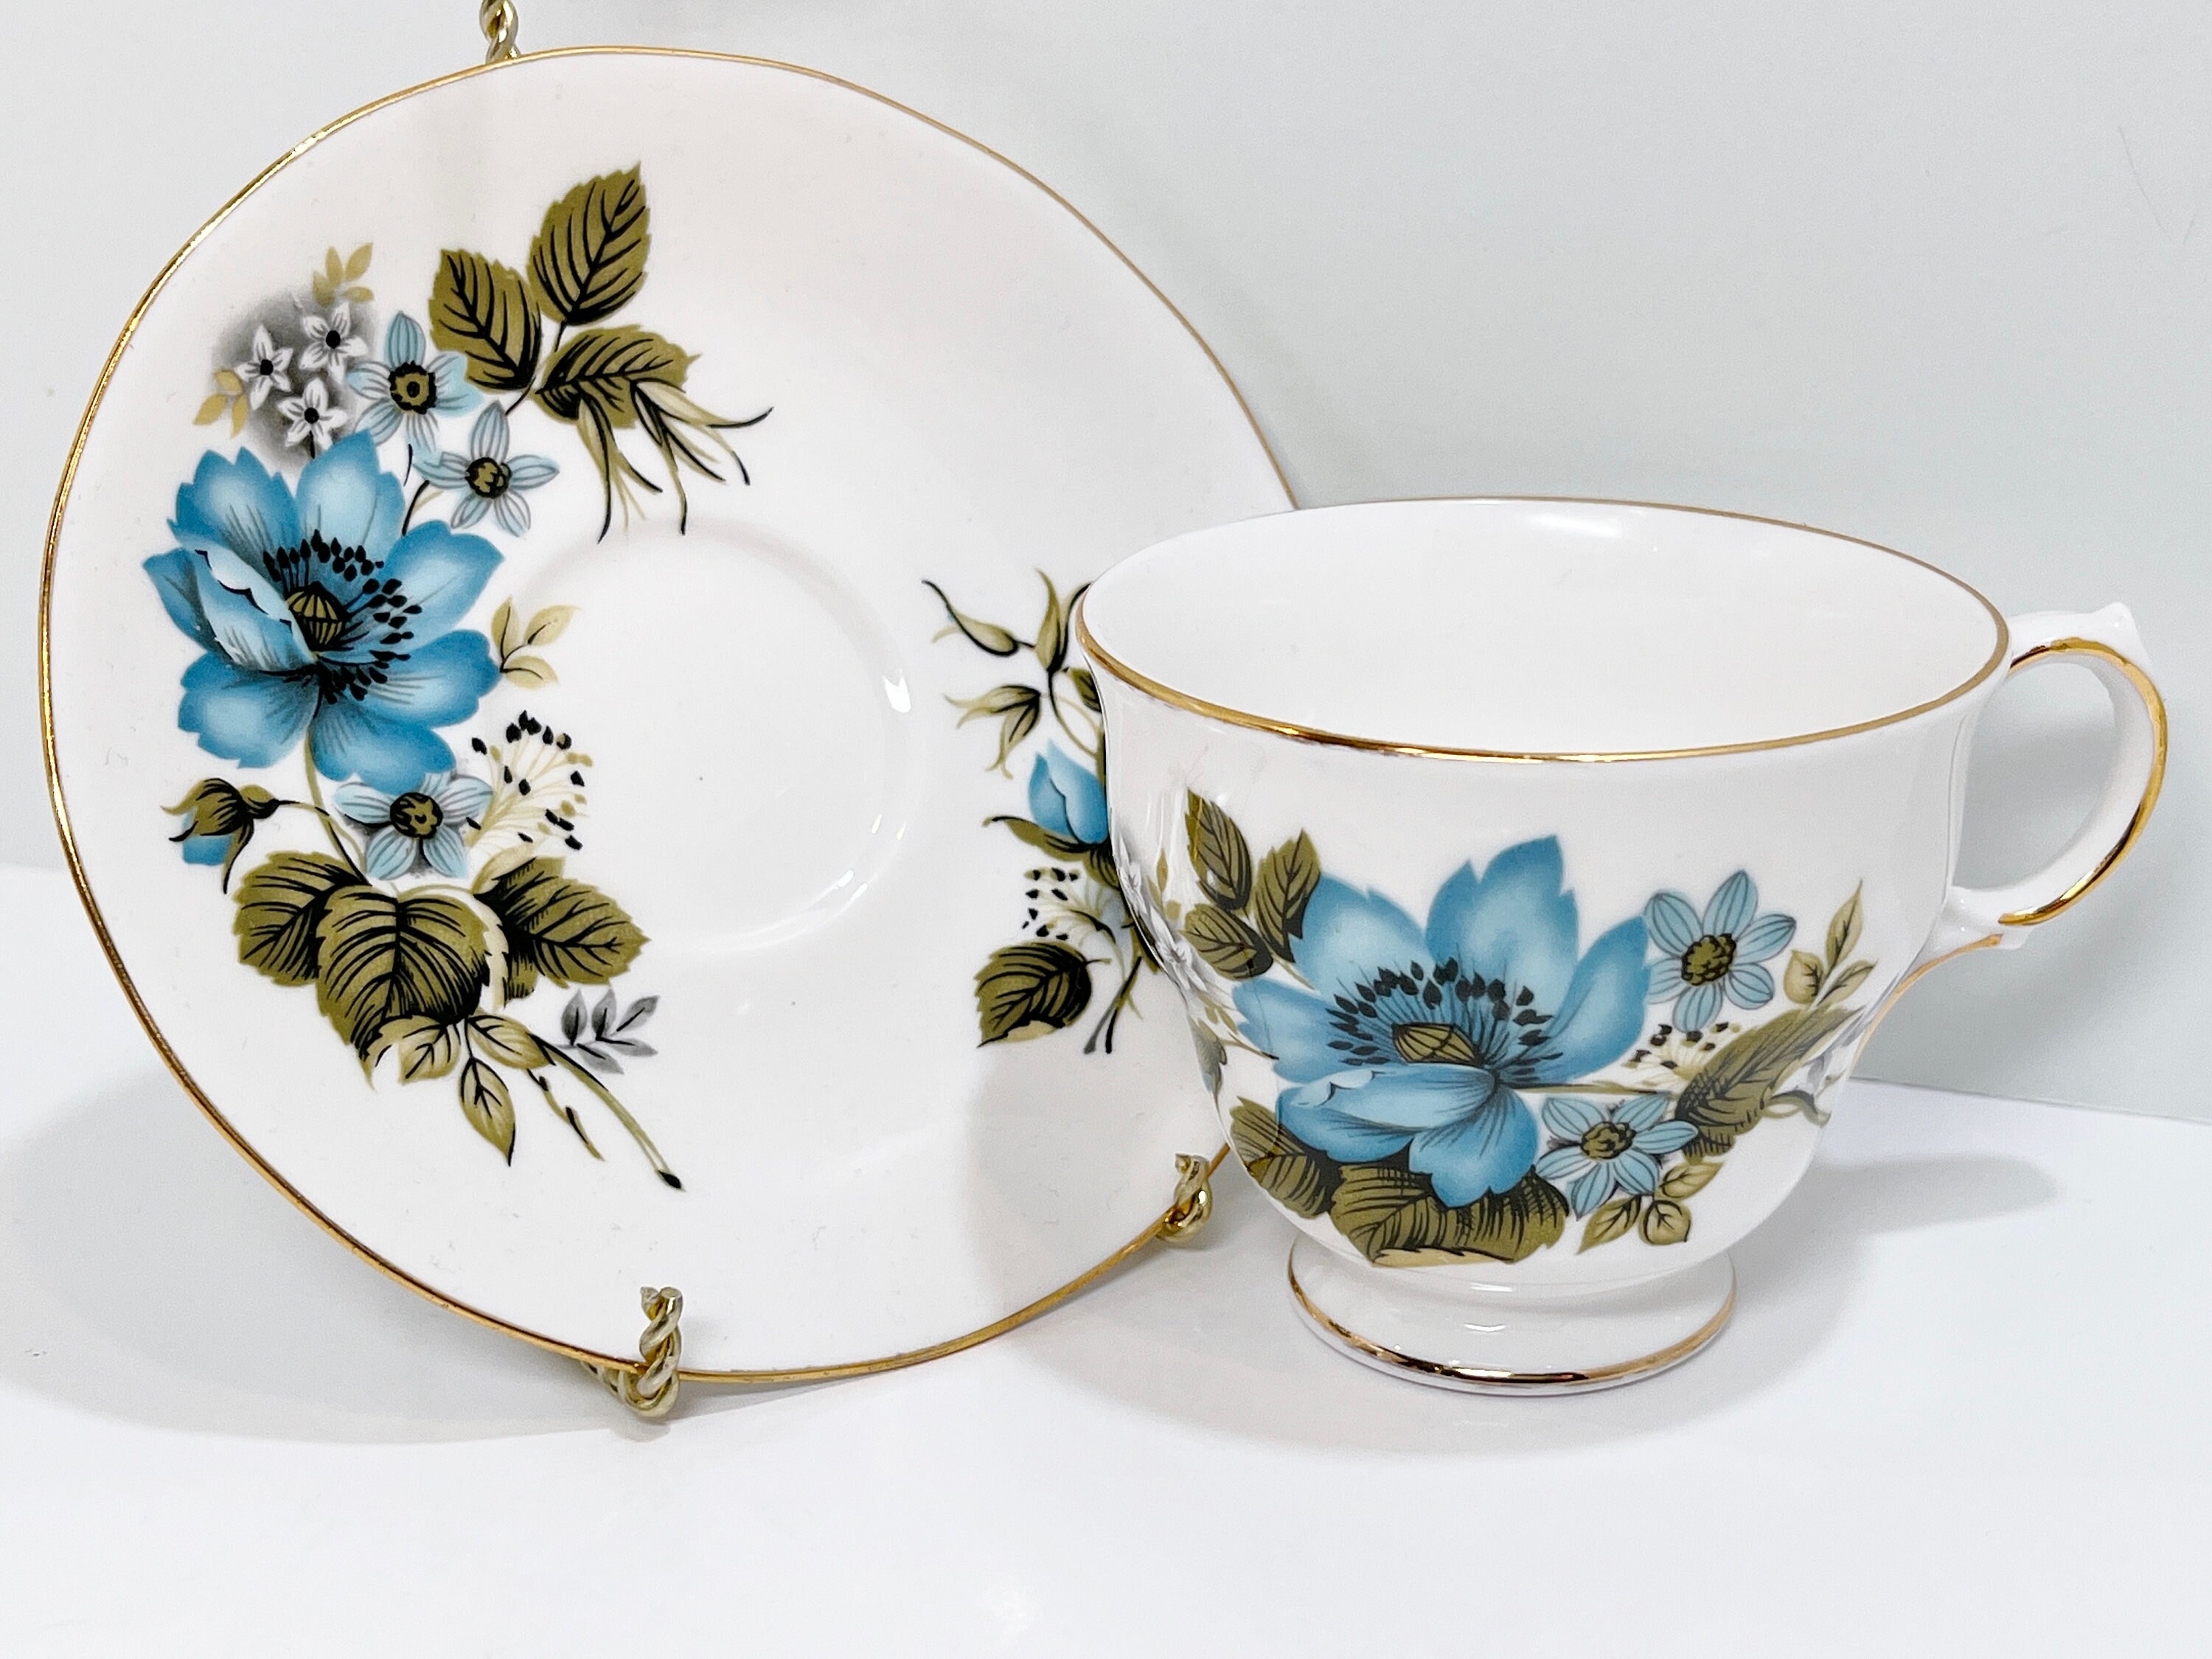 Beautiful British Tea Cups, Unique Afternoon Tea Cups and Saucers